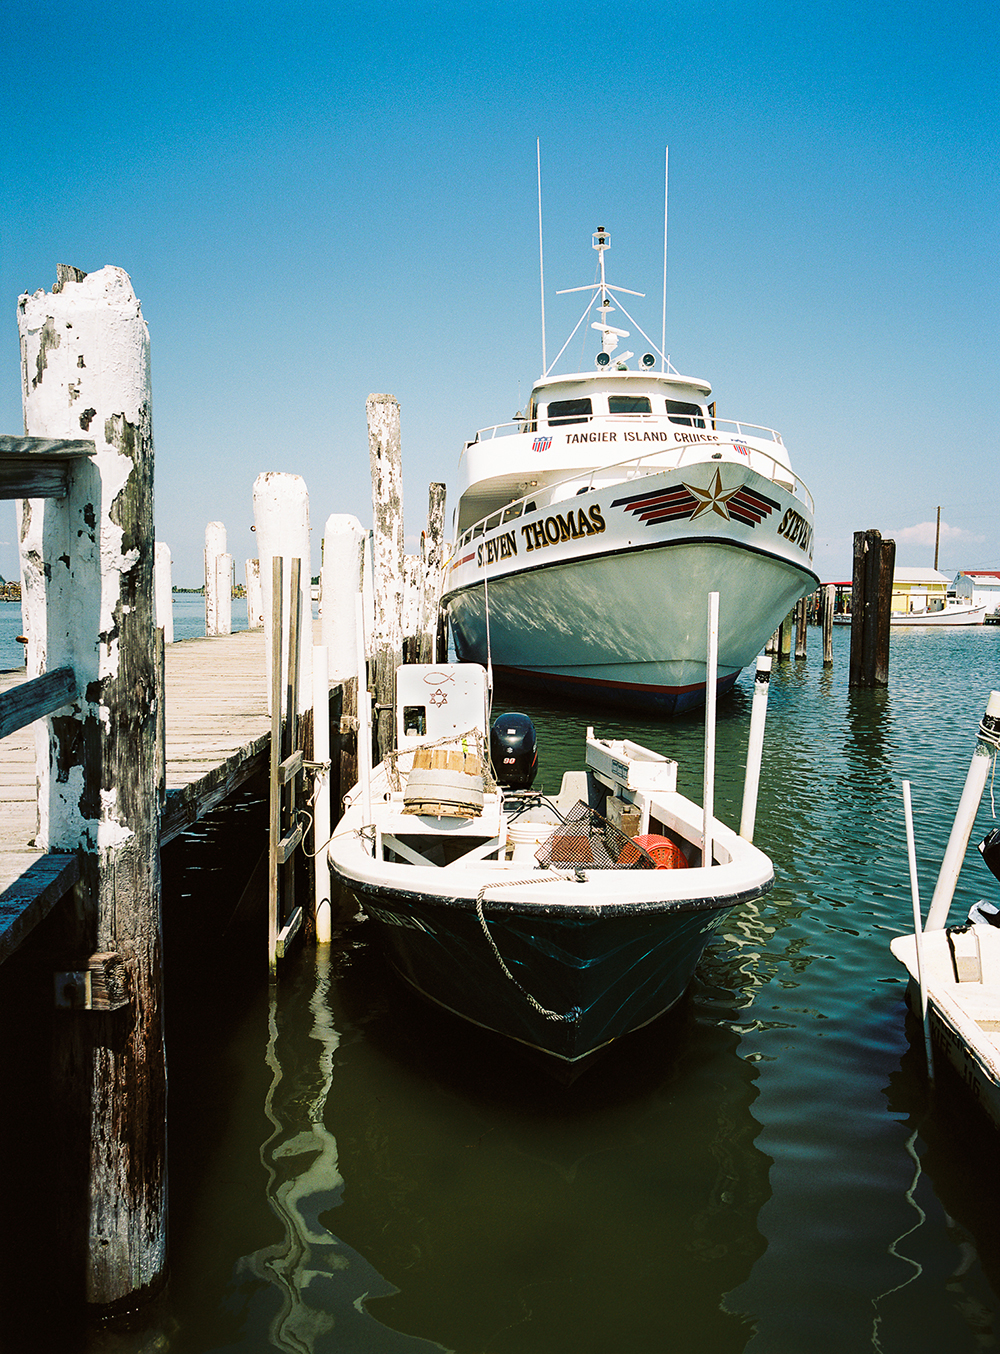 Photograph by Gunner Hughes of dock and boats on Tangier Island, Chesapeake Bay